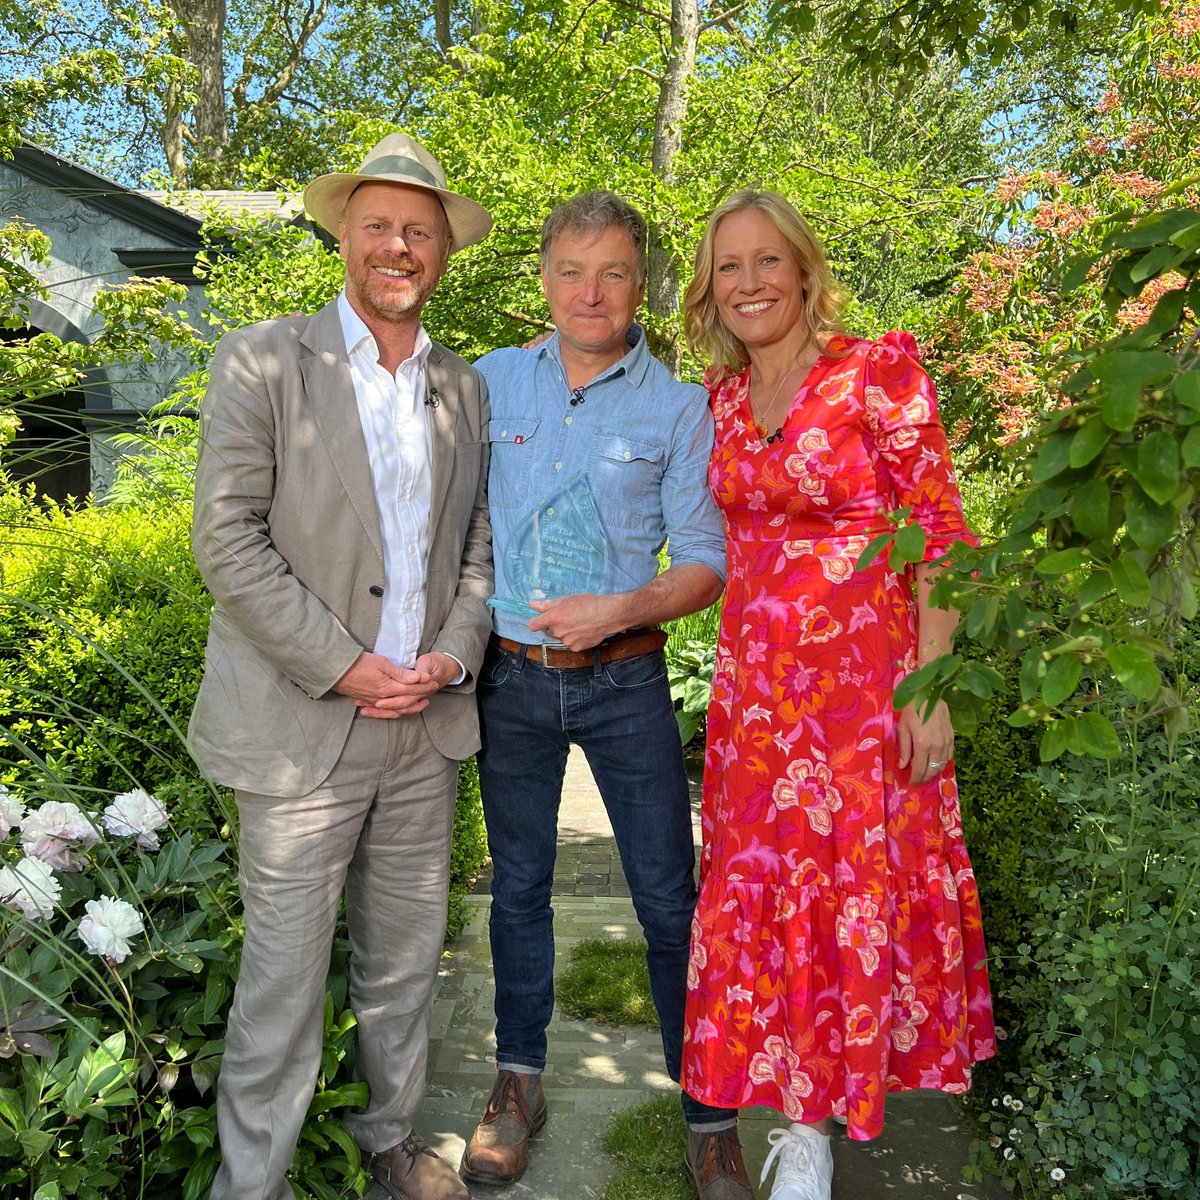 Massive congratulations to @chrisbeardshaw for winning the BBC/ RHS People's Choice Award with the Myeloma UK - A Life Worth Living Garden 

🏆👏🙌🌿🌼🤩🍃🌸

#BBCChelsea #ChelseaFlowerShow